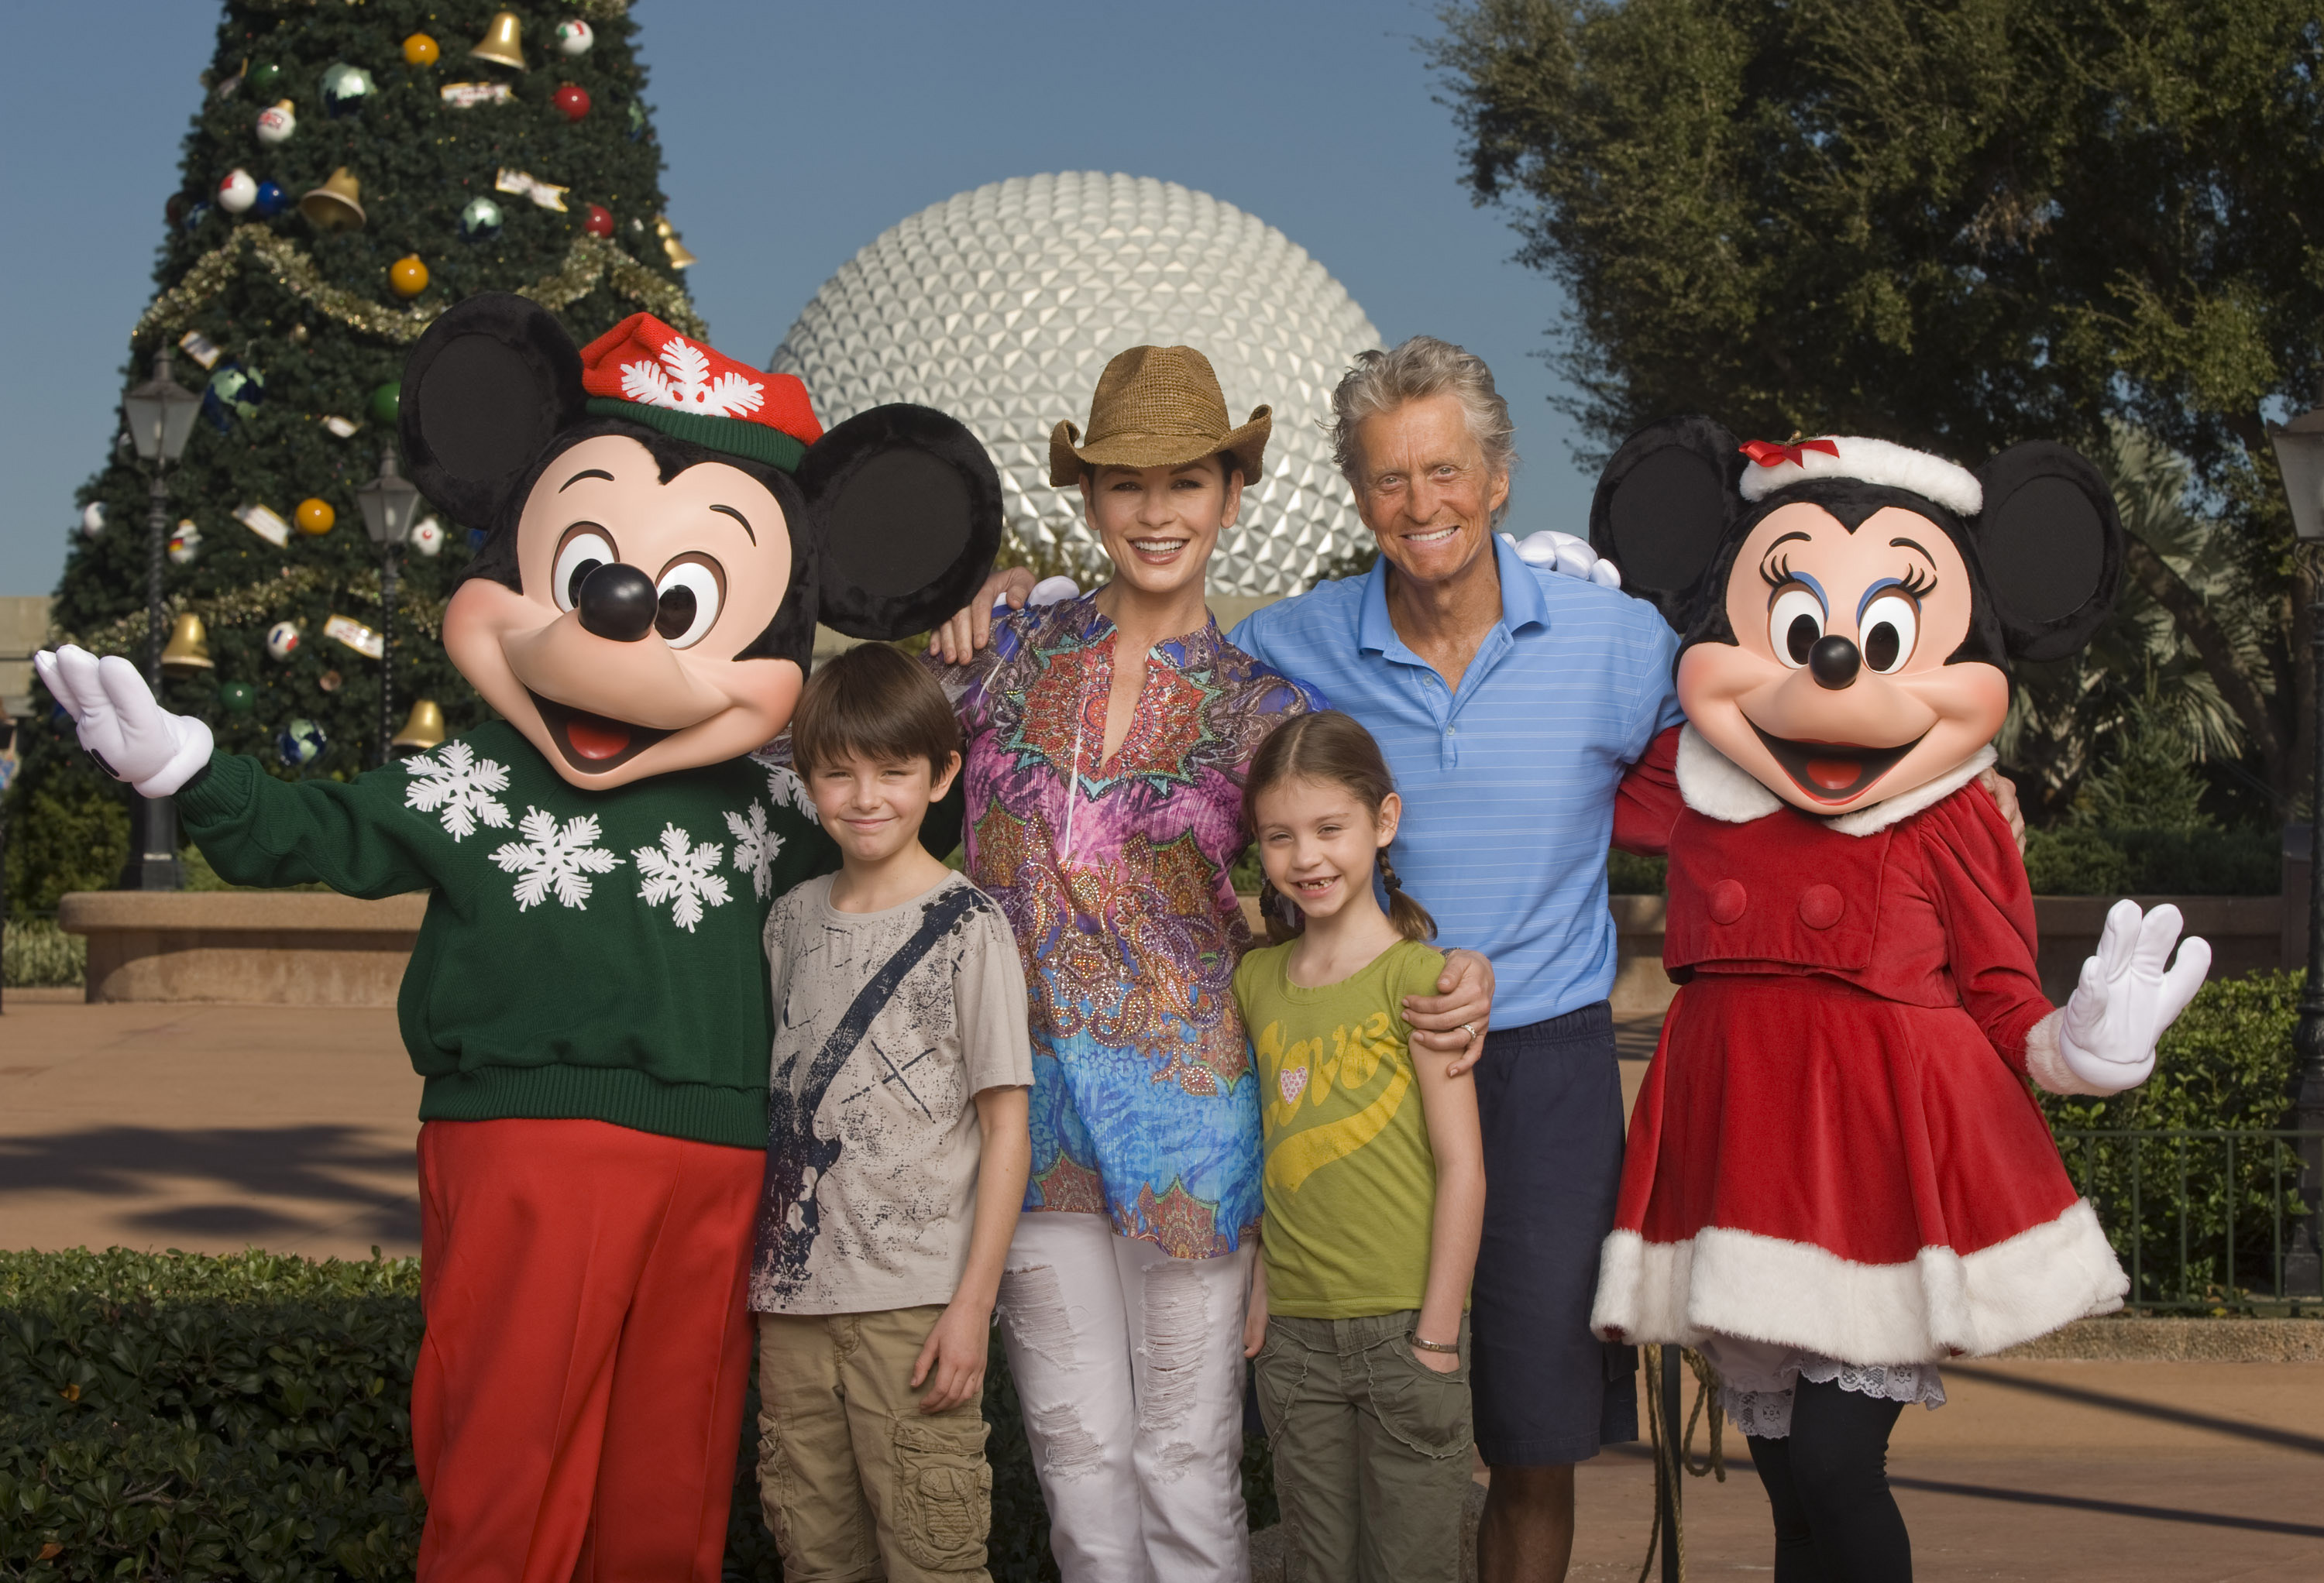 Michael Douglas, Catherine Zeta-Jones, and their children Dylan and Carys at at the Walt Disney World Resort  in Lake Buena Vista, Florida on November 24, 2010 | Source: Getty Images